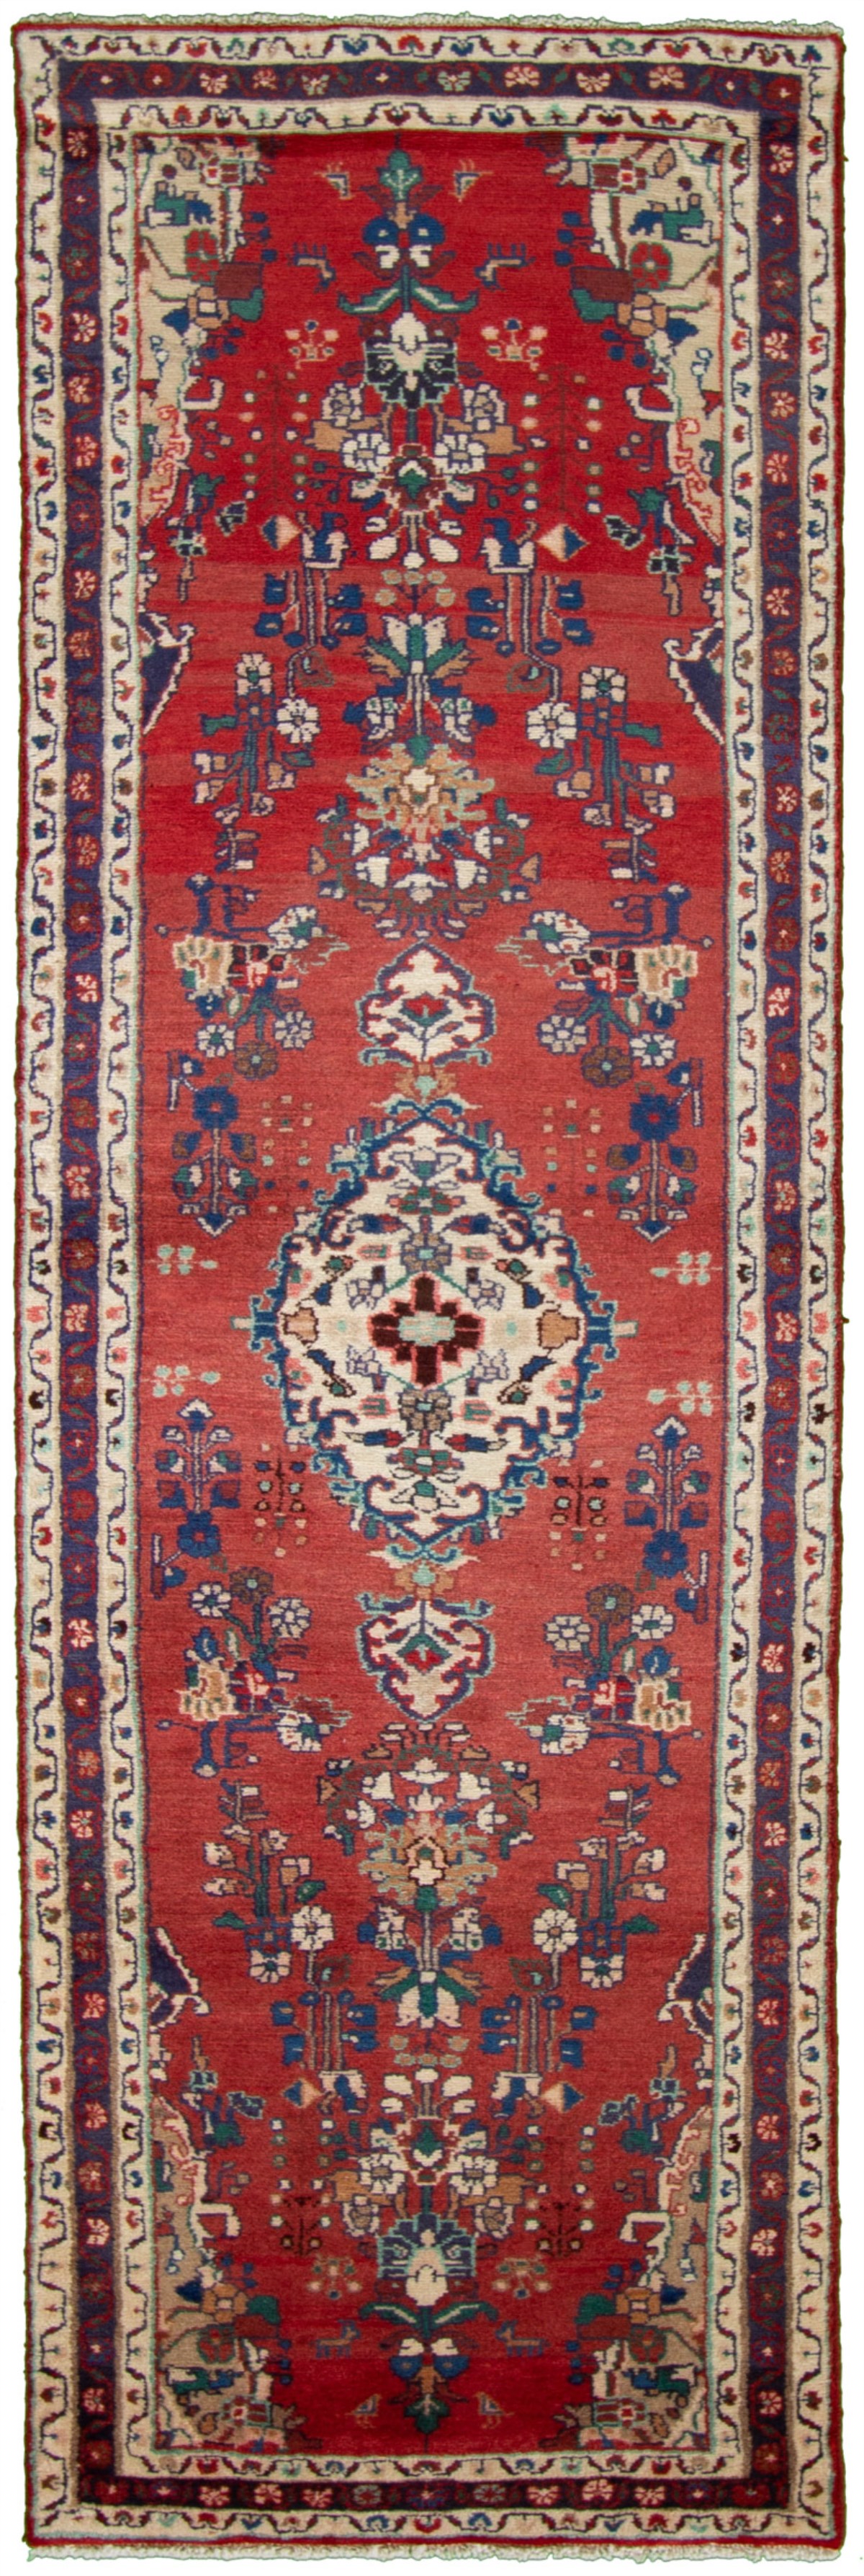 Hand-knotted Hamadan Red Wool Rug 2'11" x 9'11" Size: 2'11" x 9'11"  